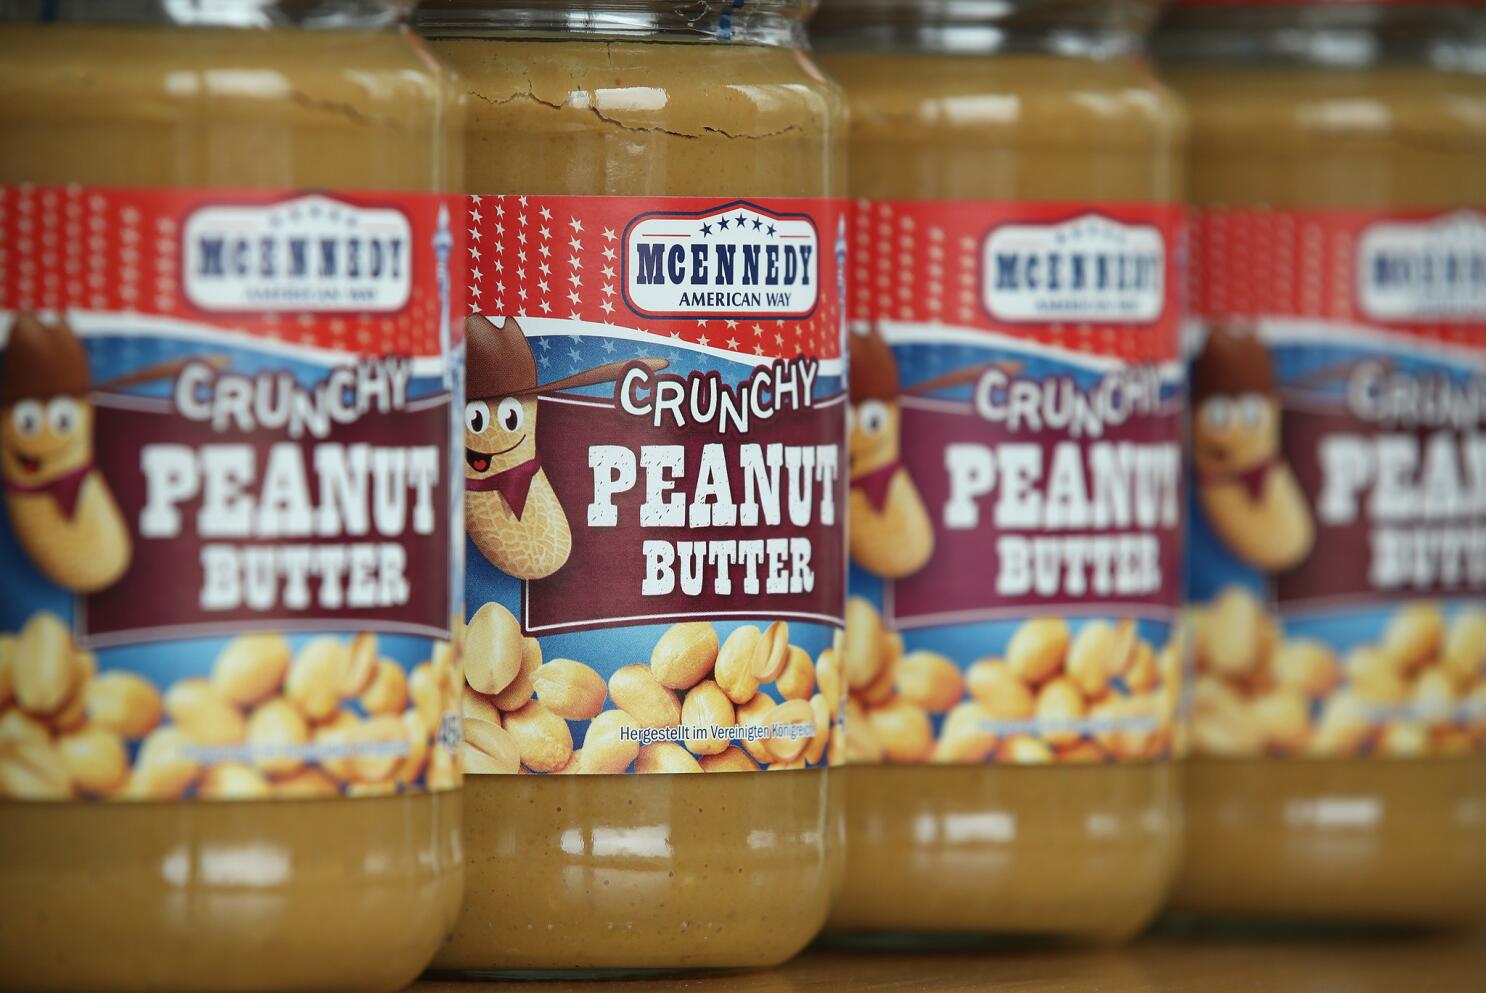 Analysis:: Europe is using peanut butter to send - San Diego a The Union-Tribune Trump message to